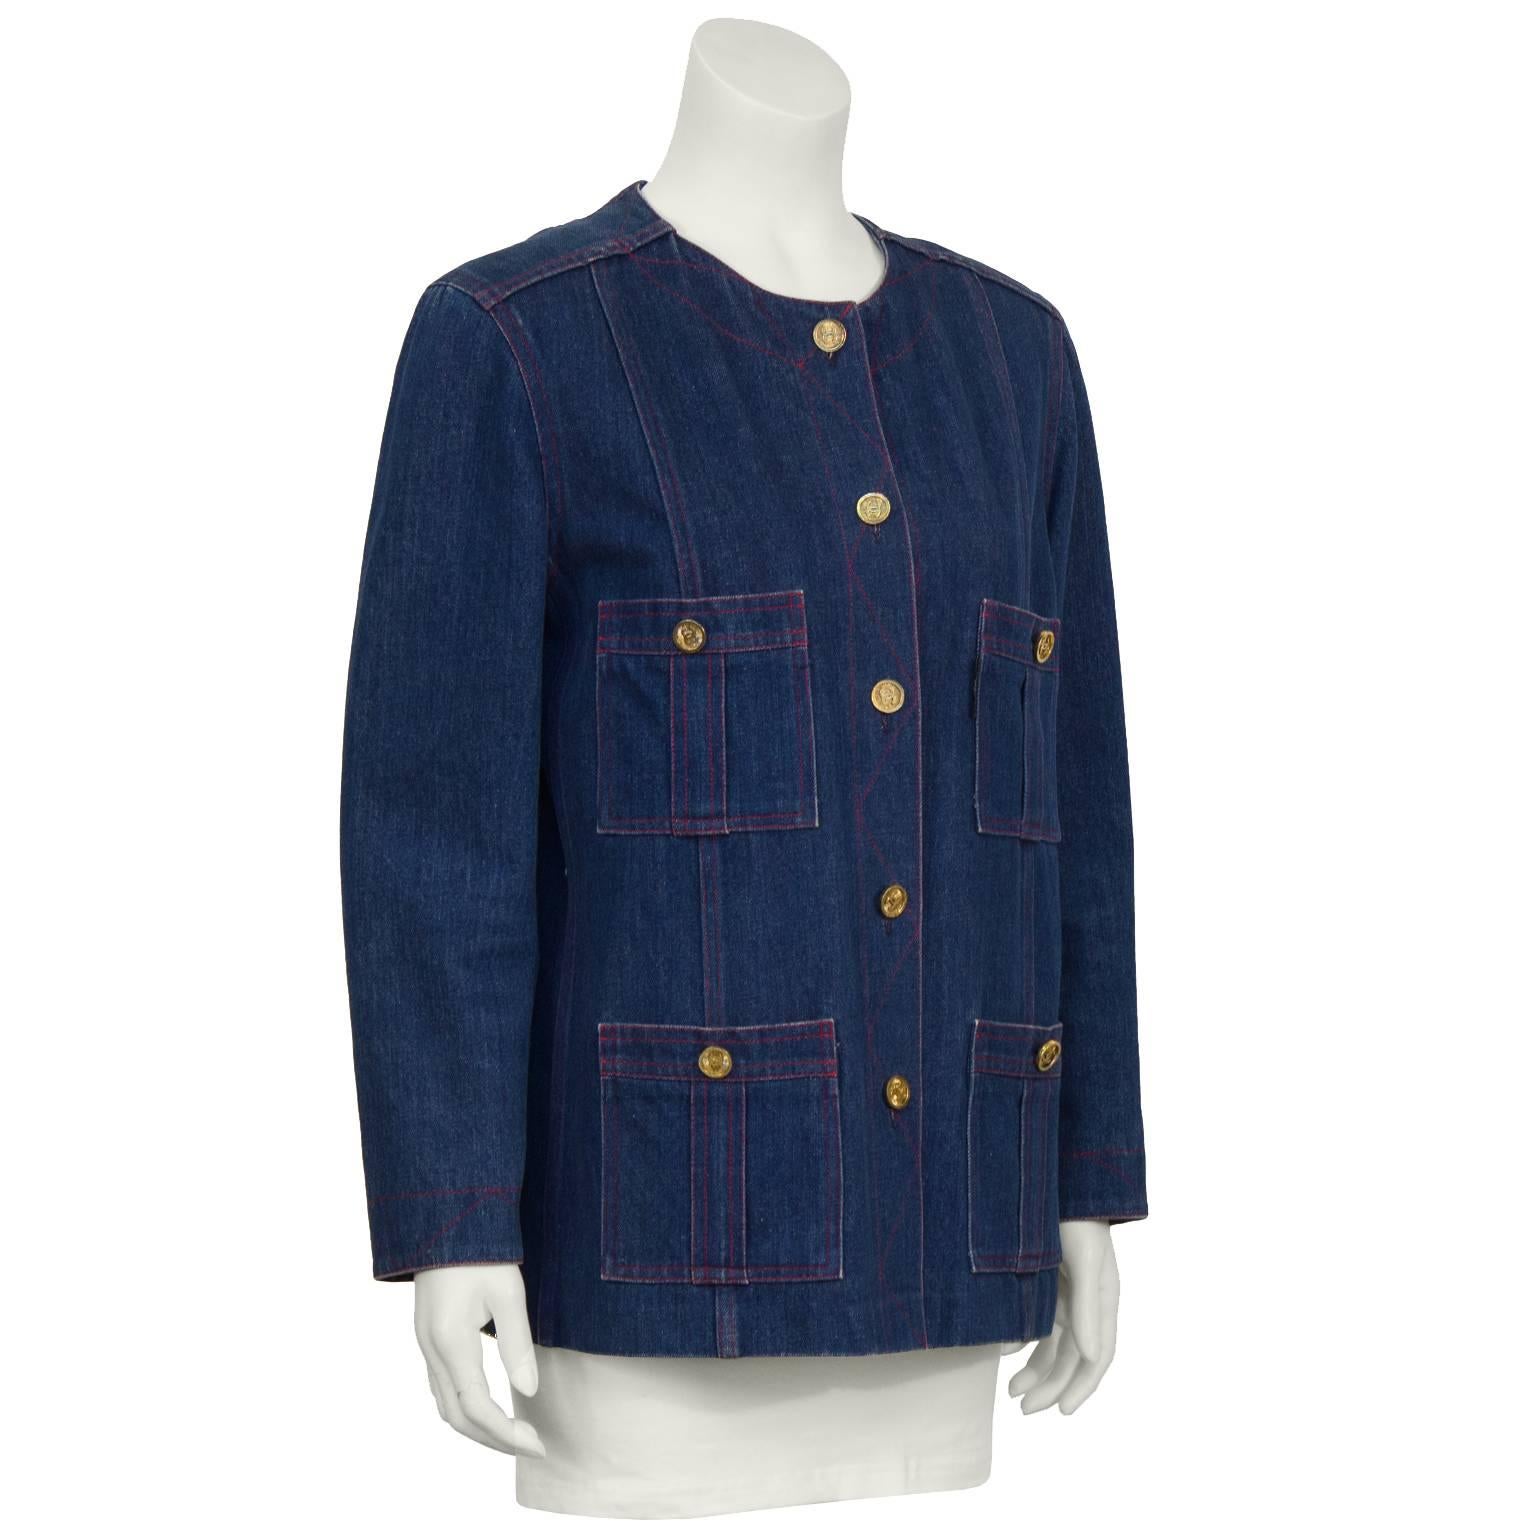 Late 1980's collarless denim jacket. The jacket is styled in the classic Chanel shape with four front patch pockets and gold CC logo buttons. Red stitching adds to the casual feel of this on-trend collectors piece. A fun take on a classic icon.